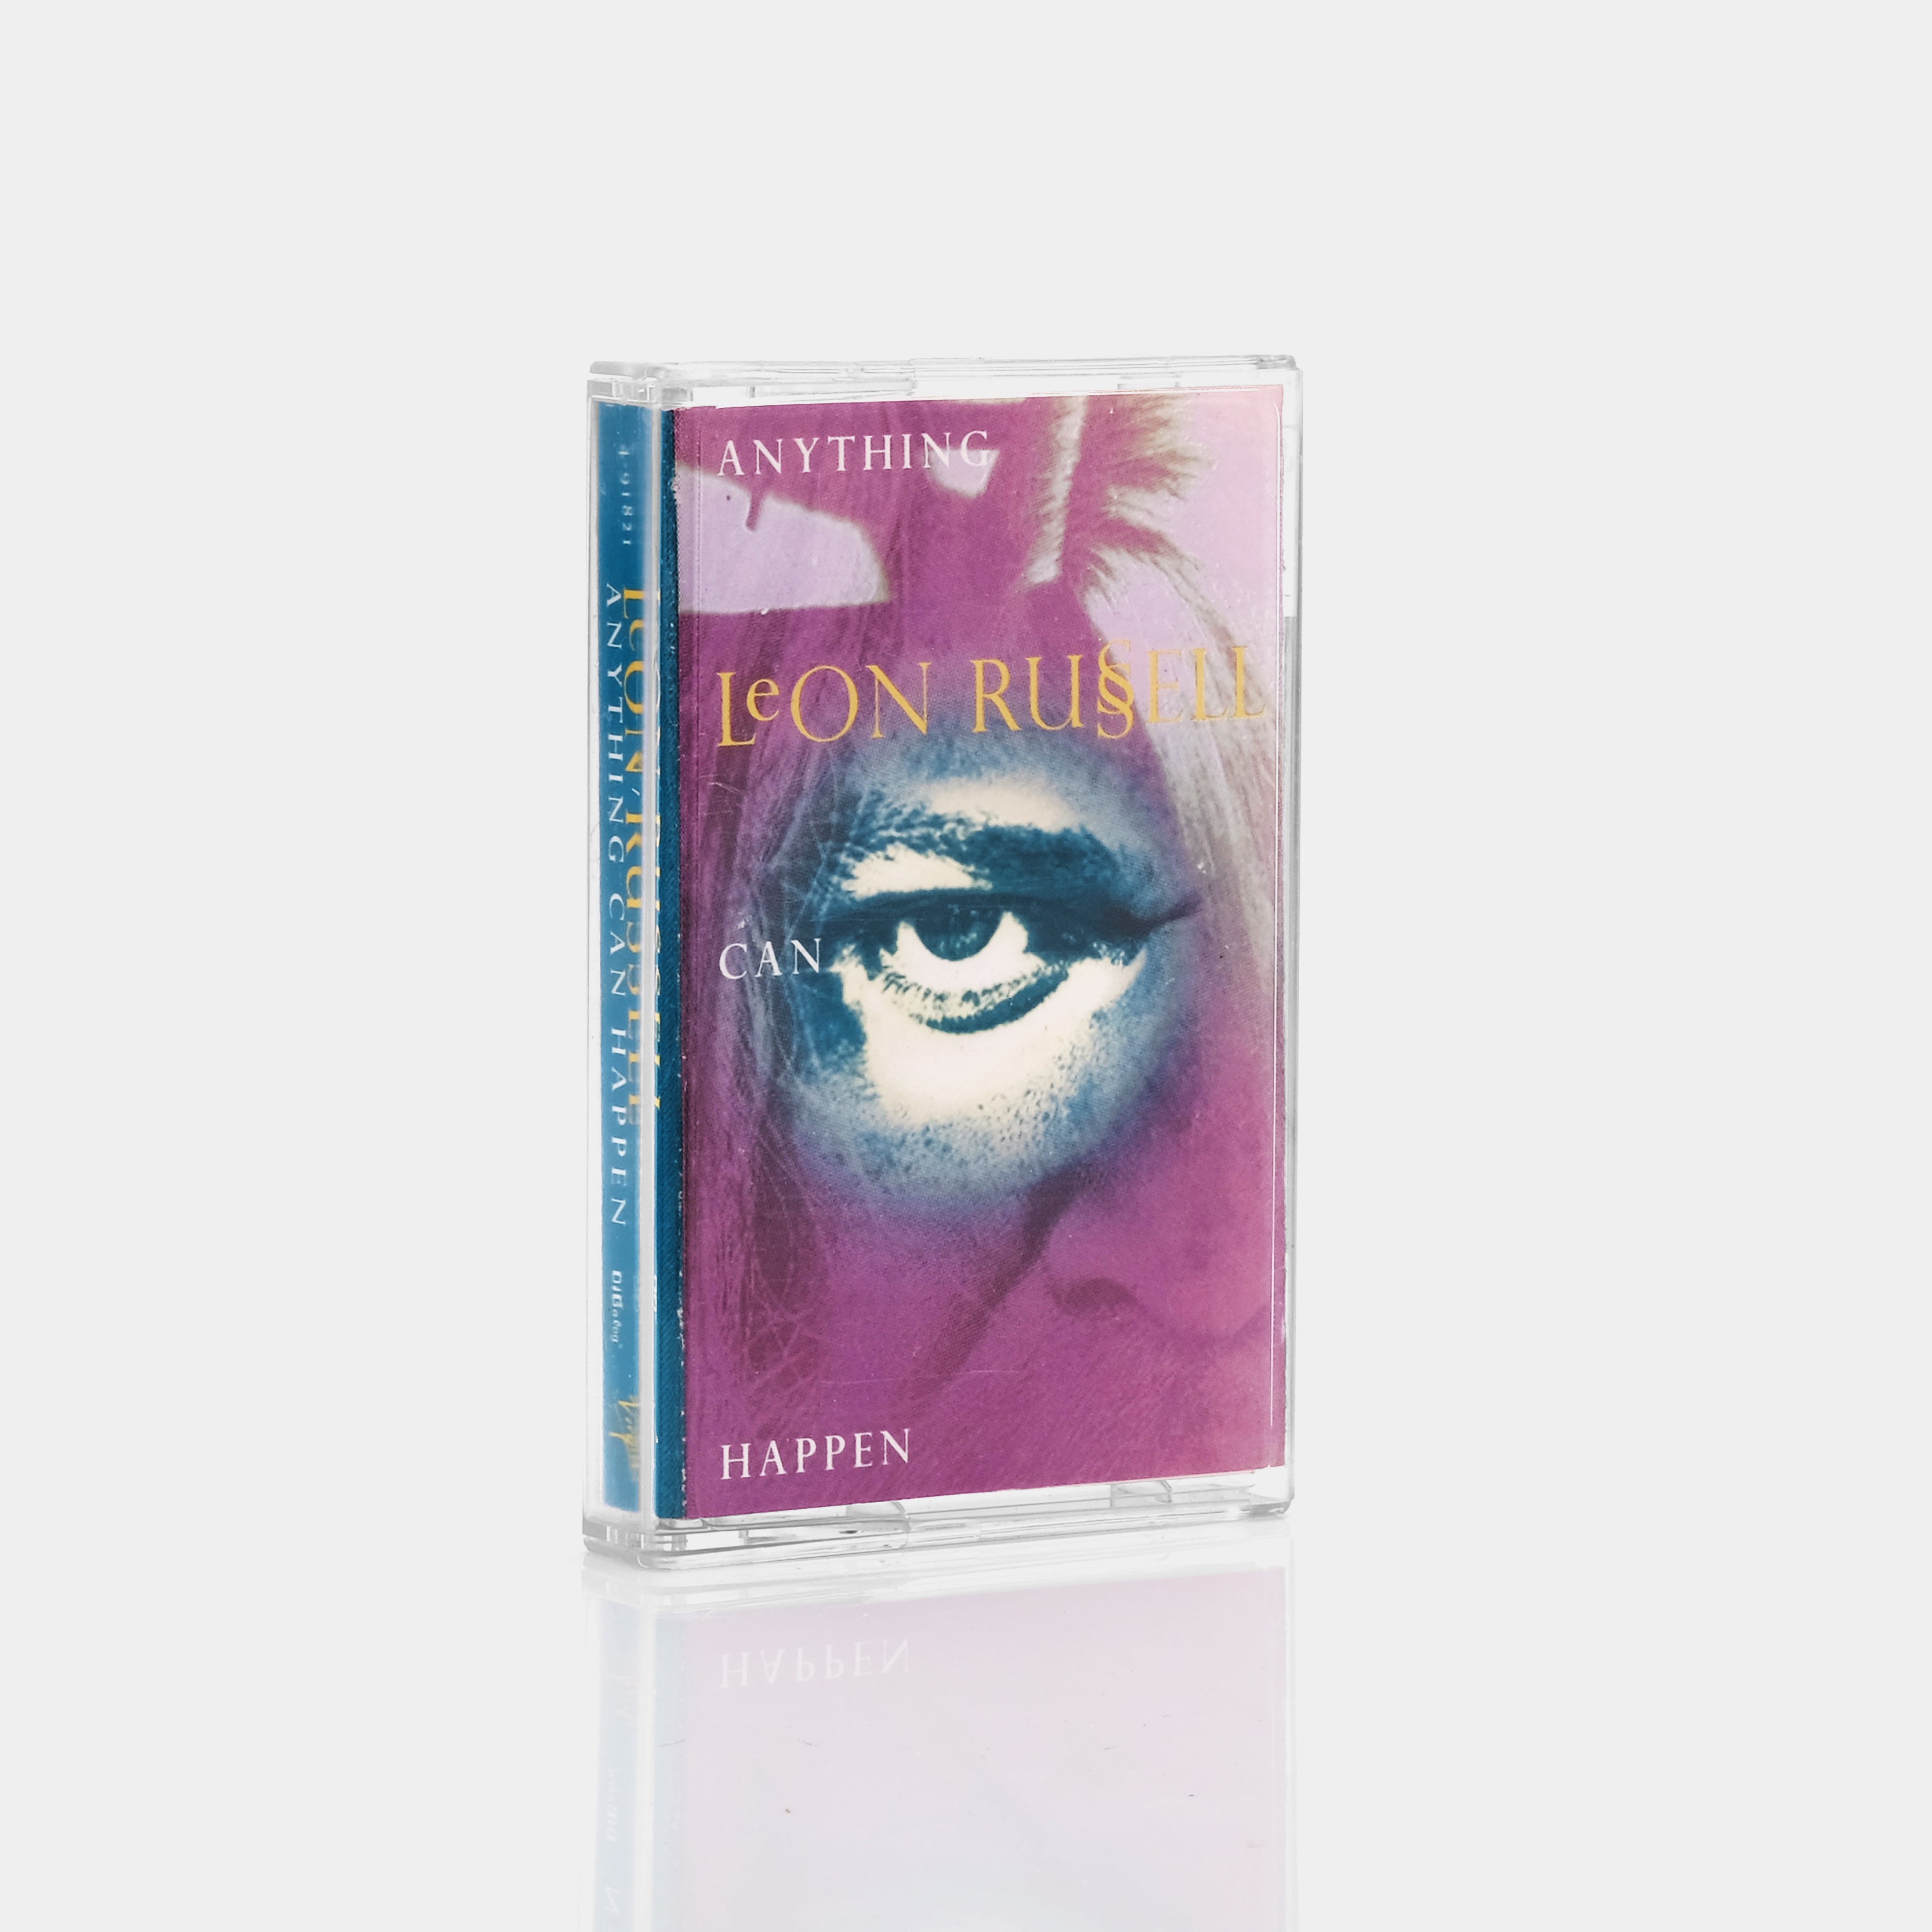 Leon Russell - Anything Can Happen Cassette Tape